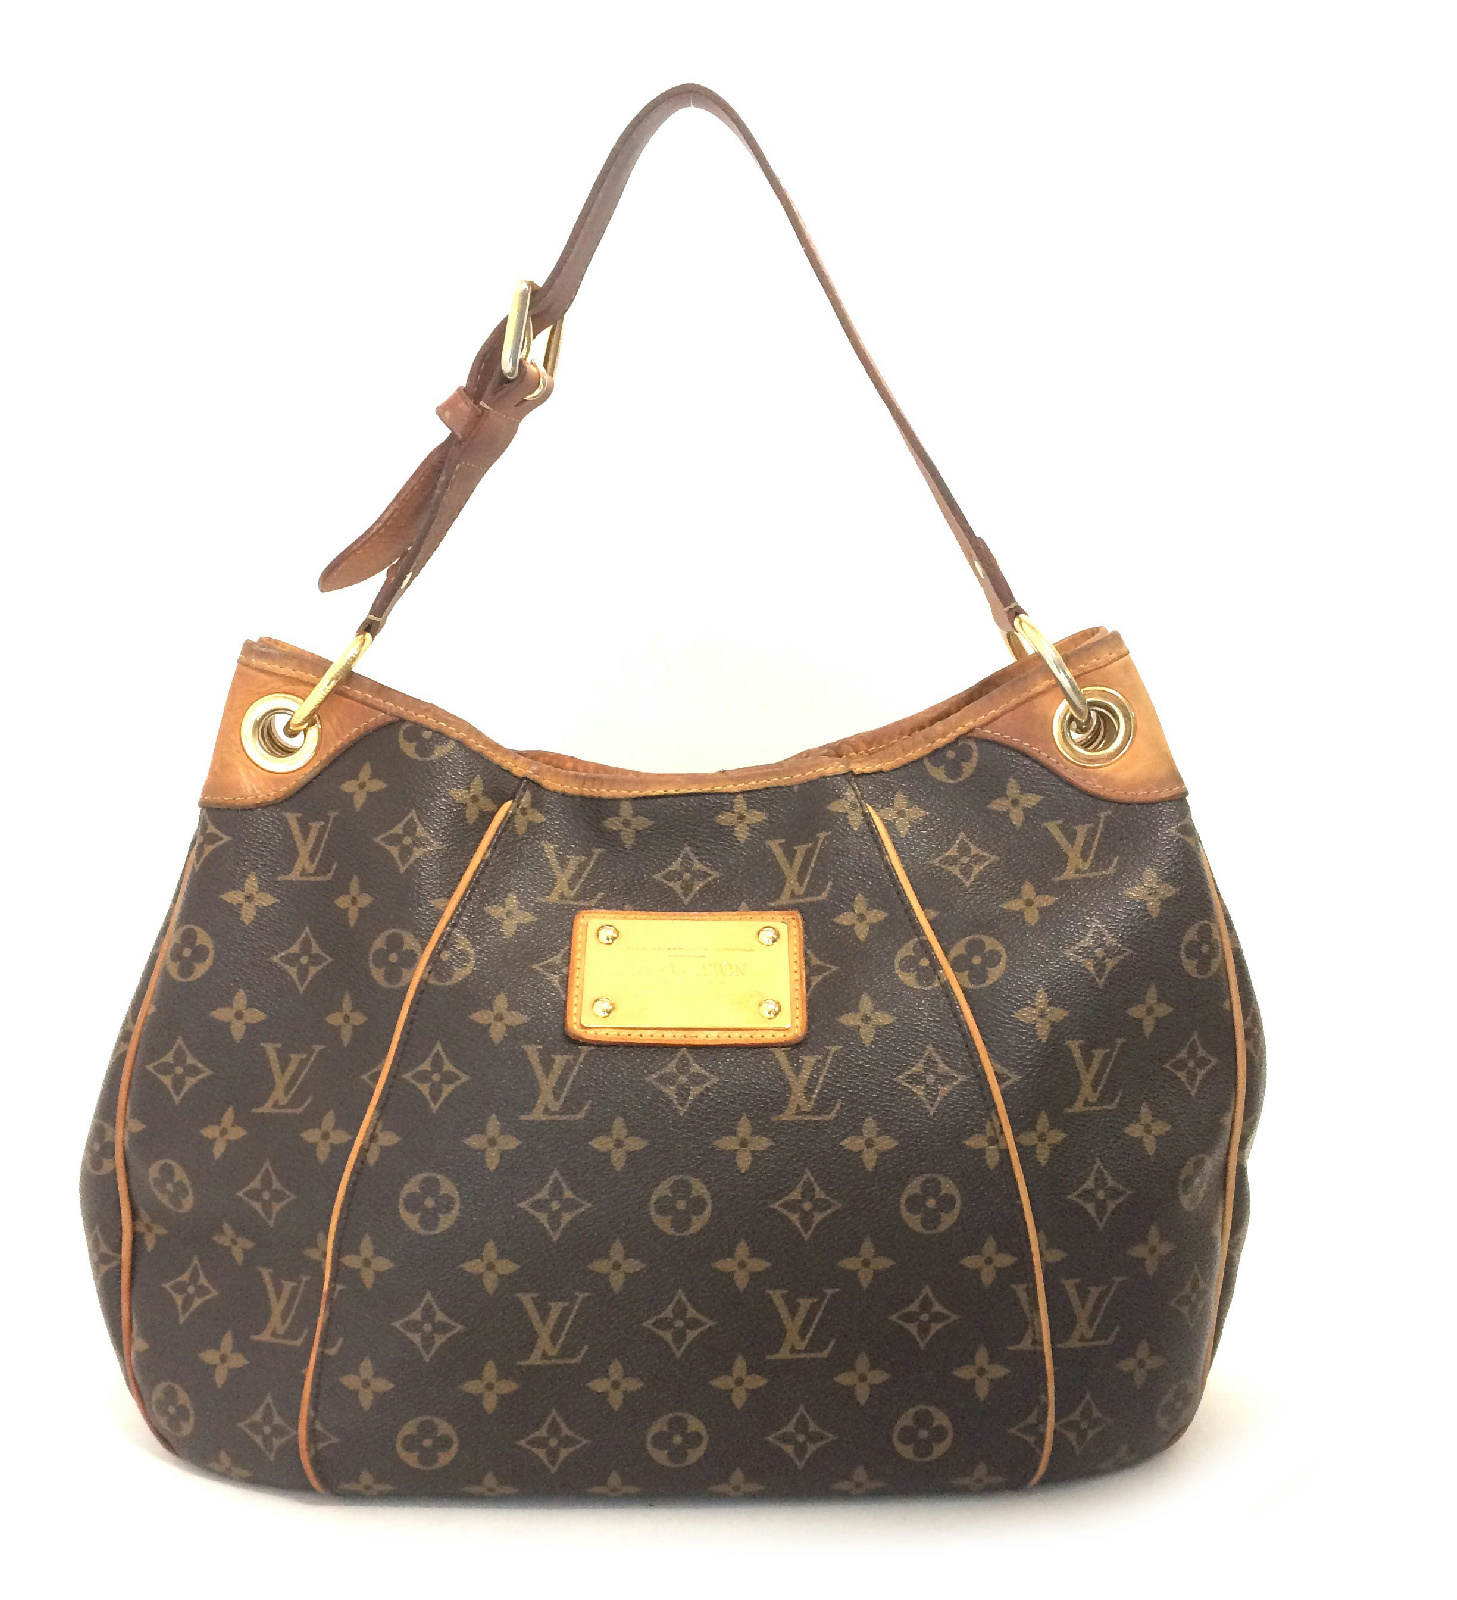 Louis Vuitton The Galleria Houston | Confederated Tribes of the Umatilla Indian Reservation